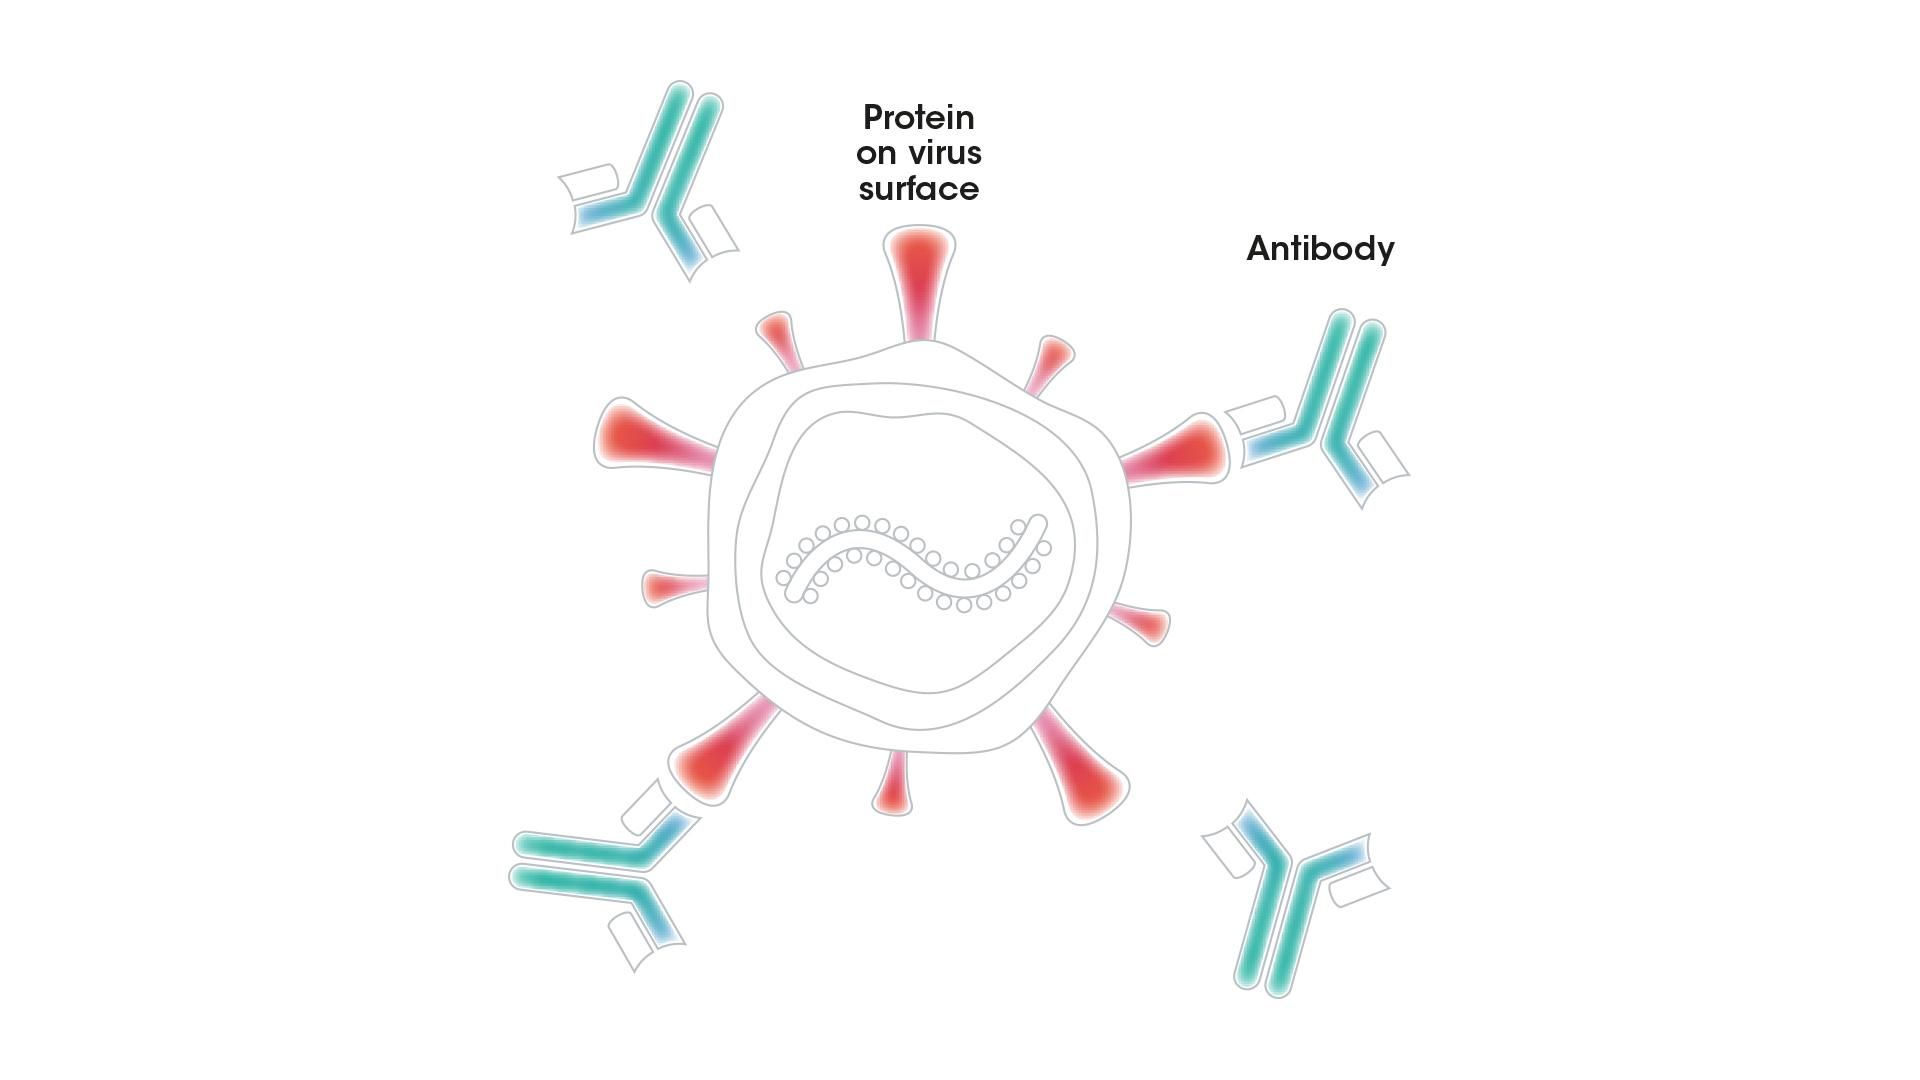 An antibody with the right properties can bind to a protein on the surface of a virus and block it from entering a person's cells or destroy it directly